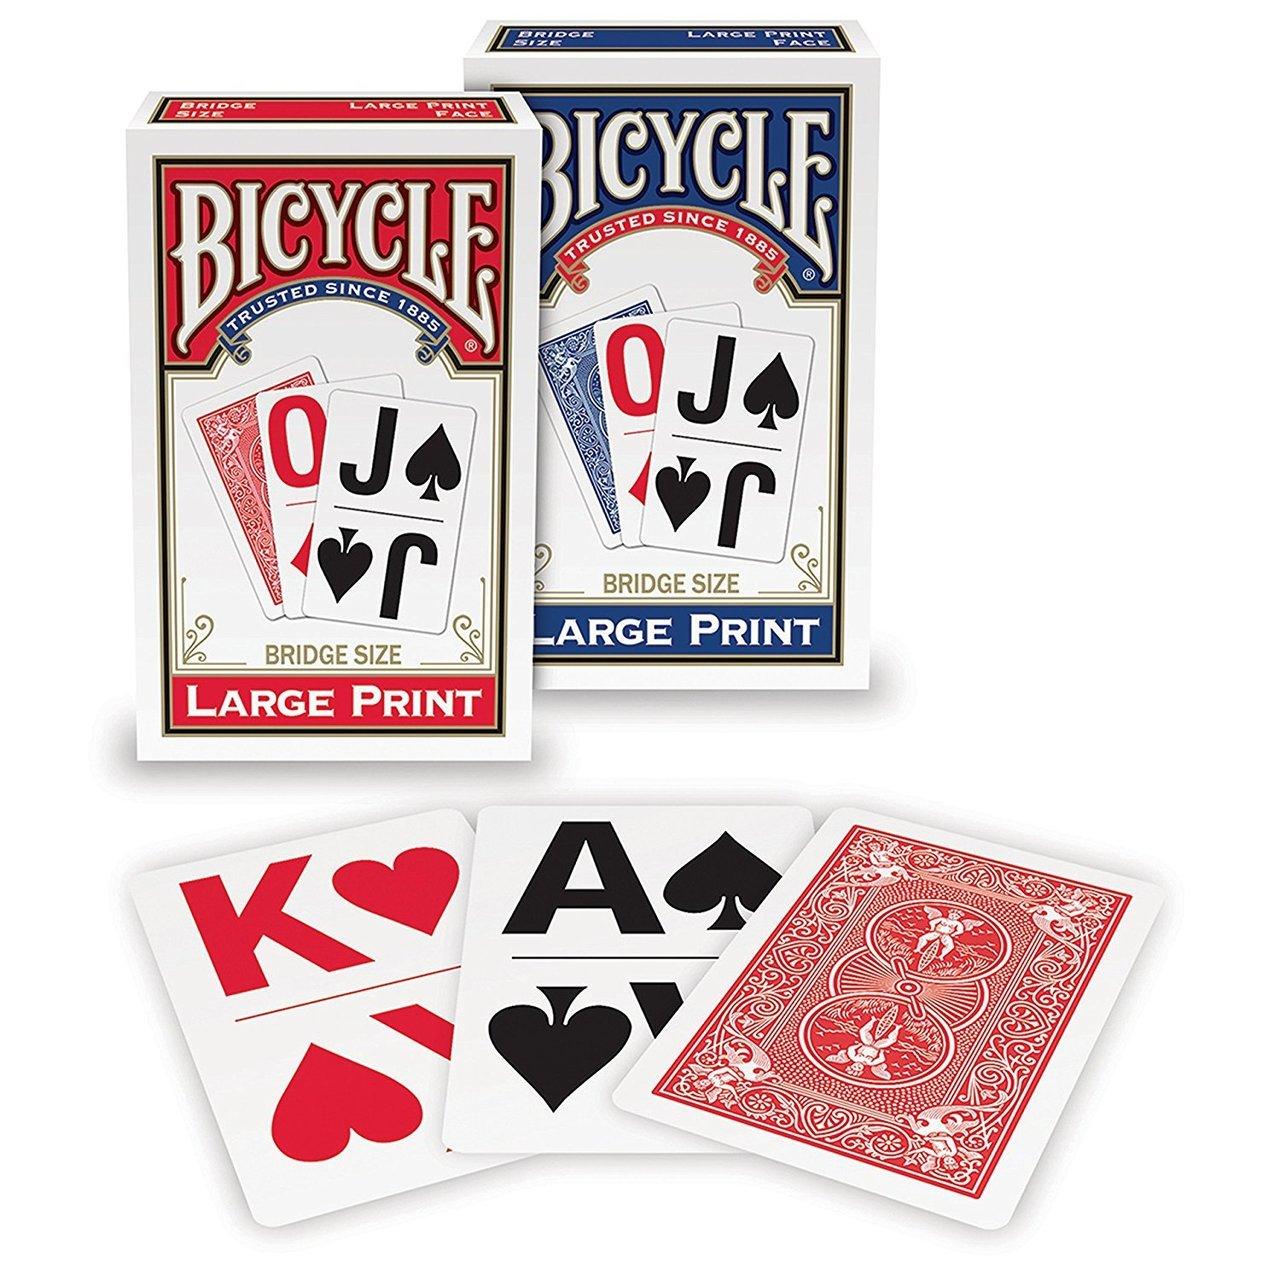 Large Print Bridge Size Playing Cards (Color may vary) - The Low Vision Store